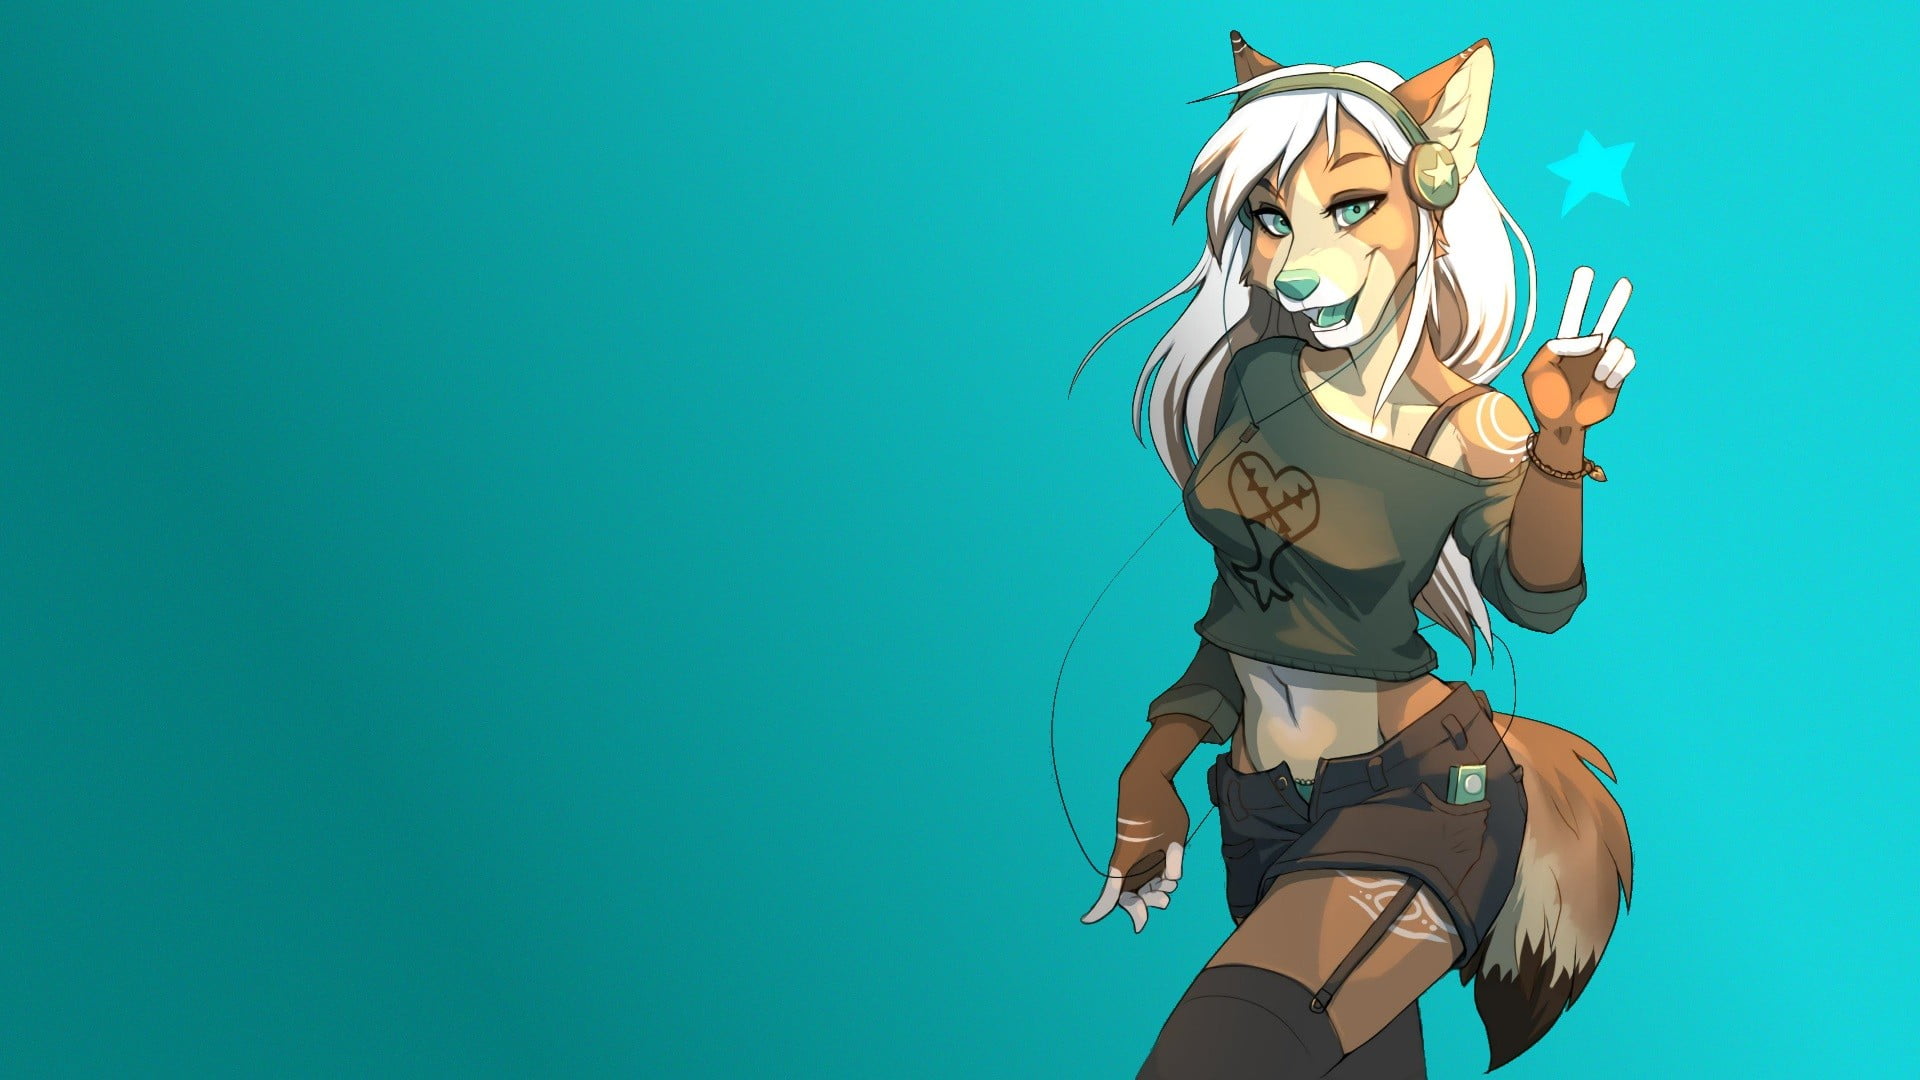 female fox illustration, furry, Anthro, falvie, young adult, young women